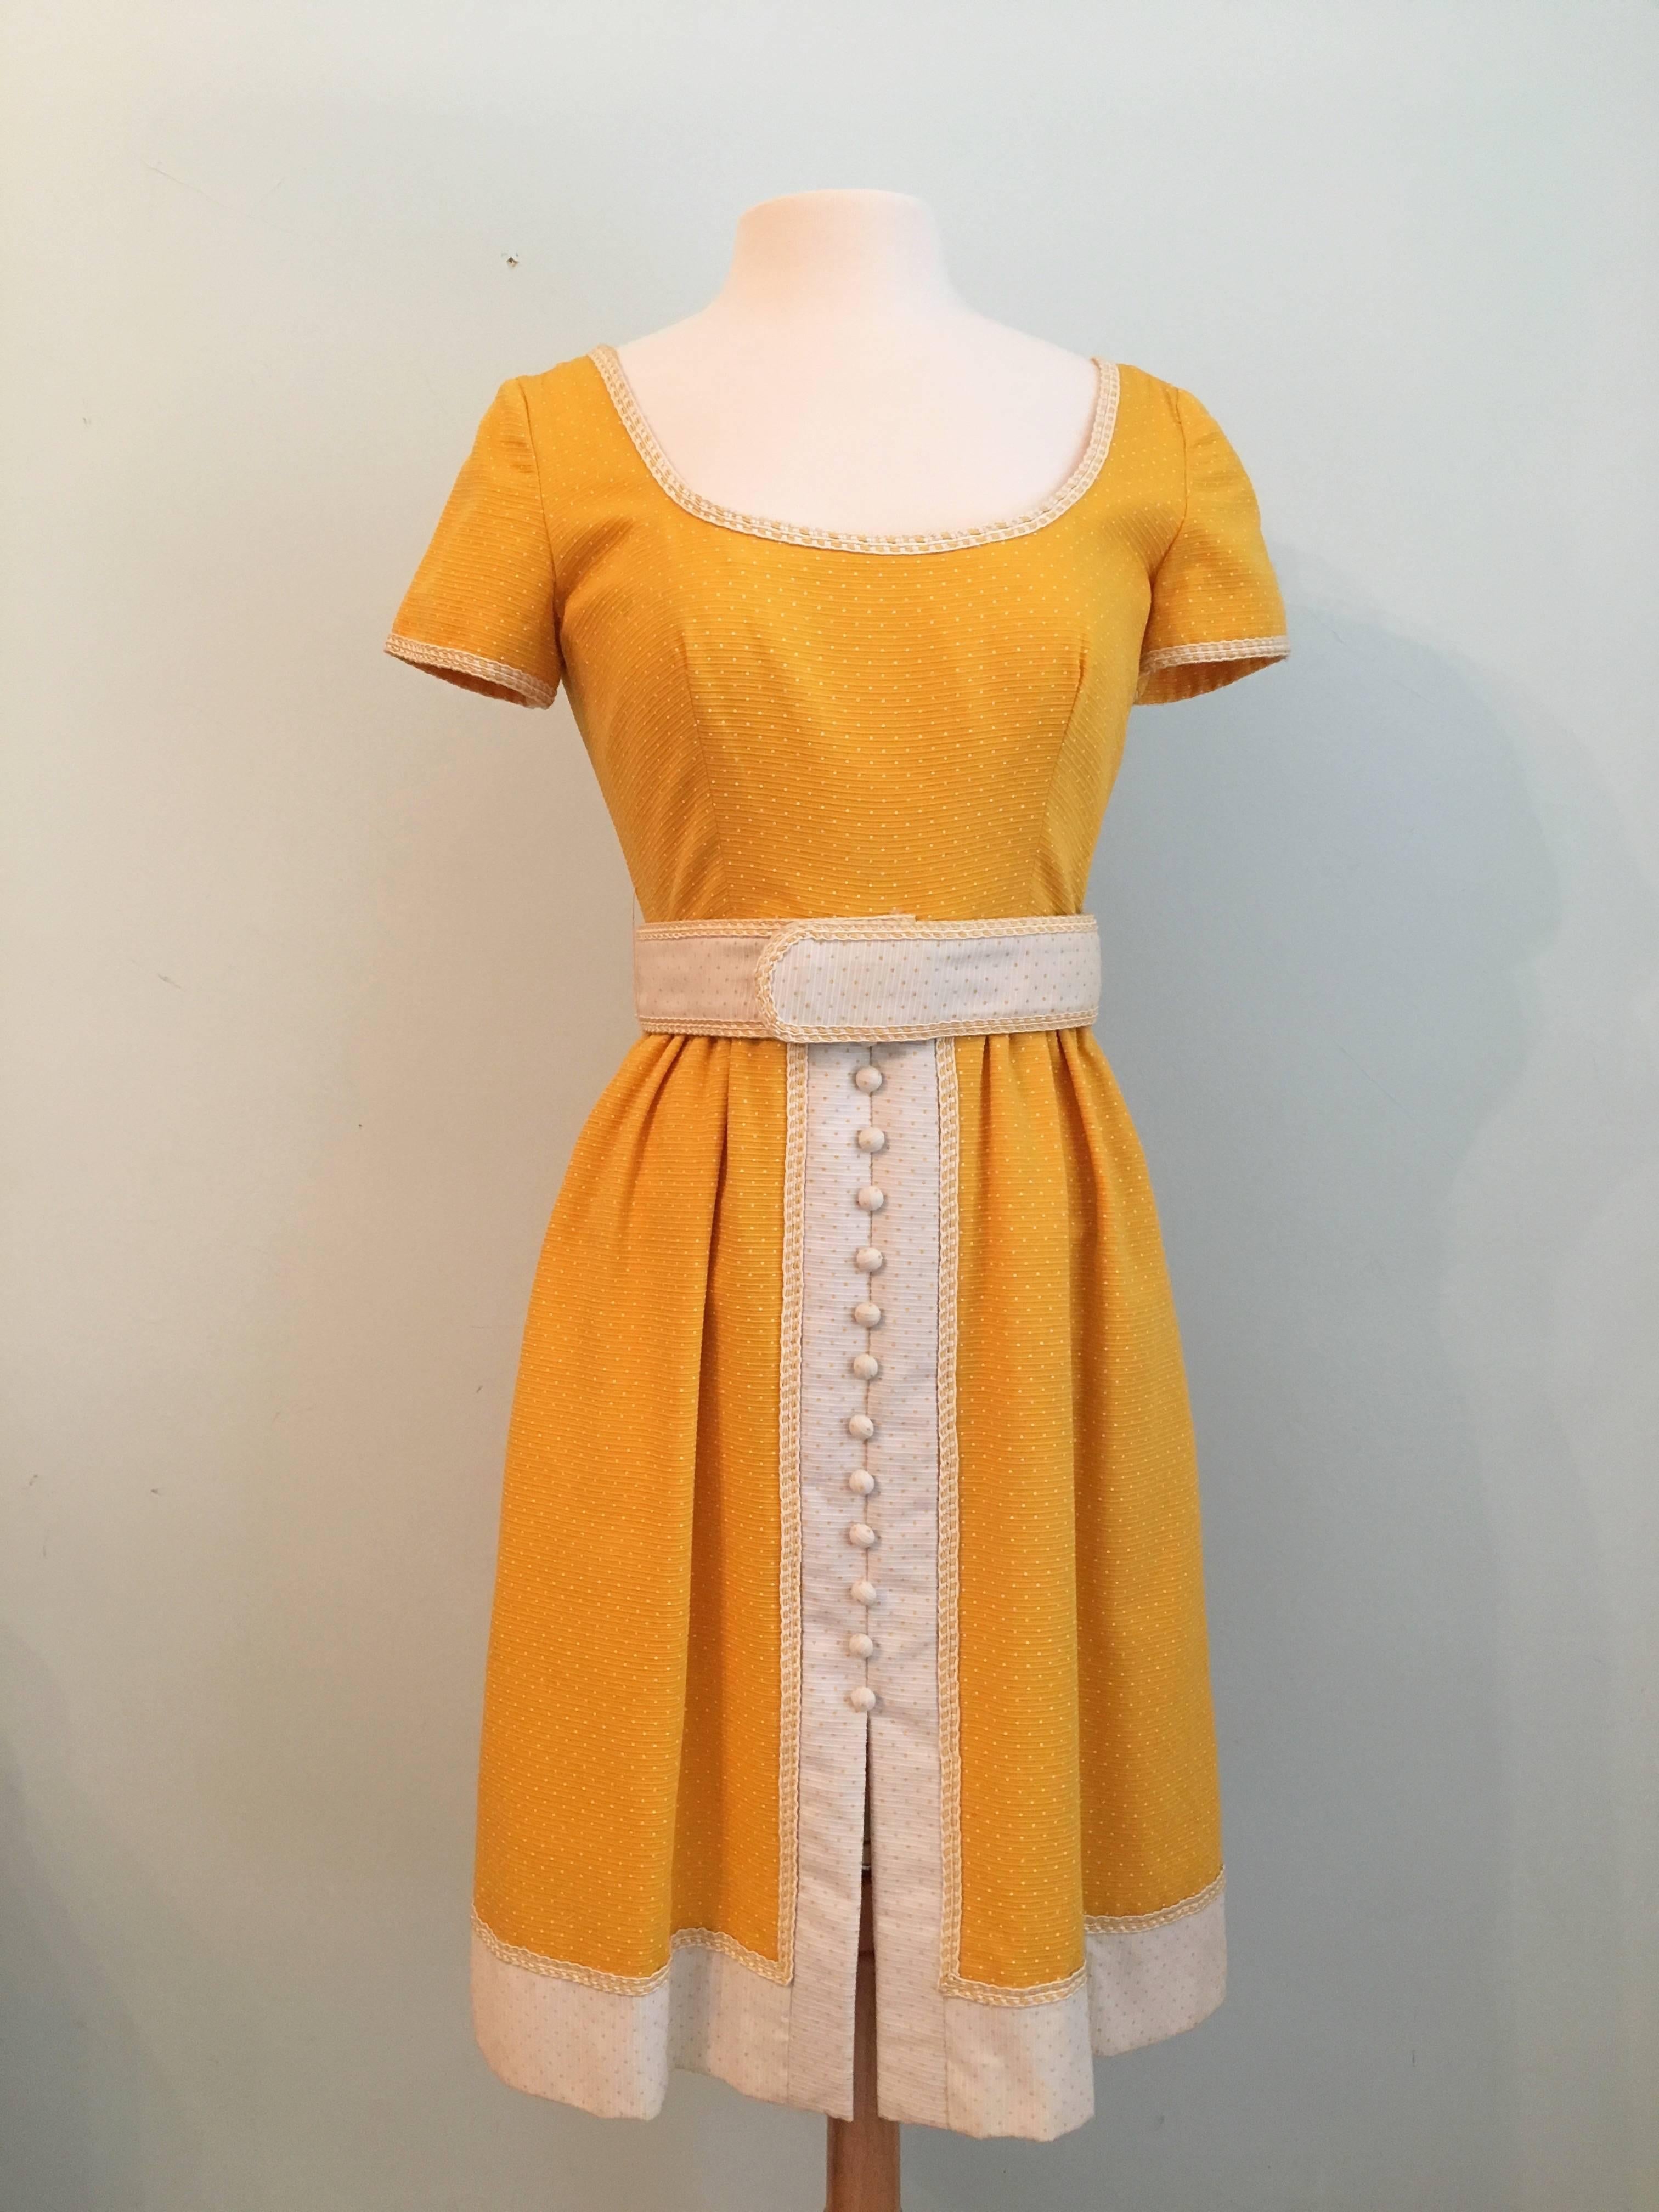 This is a rare 1960s Oscar De La Renta Boutique yellow and white polka dotted dress. The dress is made out of a yellow fabric with a raised rib-like texture that is printed with white polka dots.  It has yellow and white corded trim at the neck and